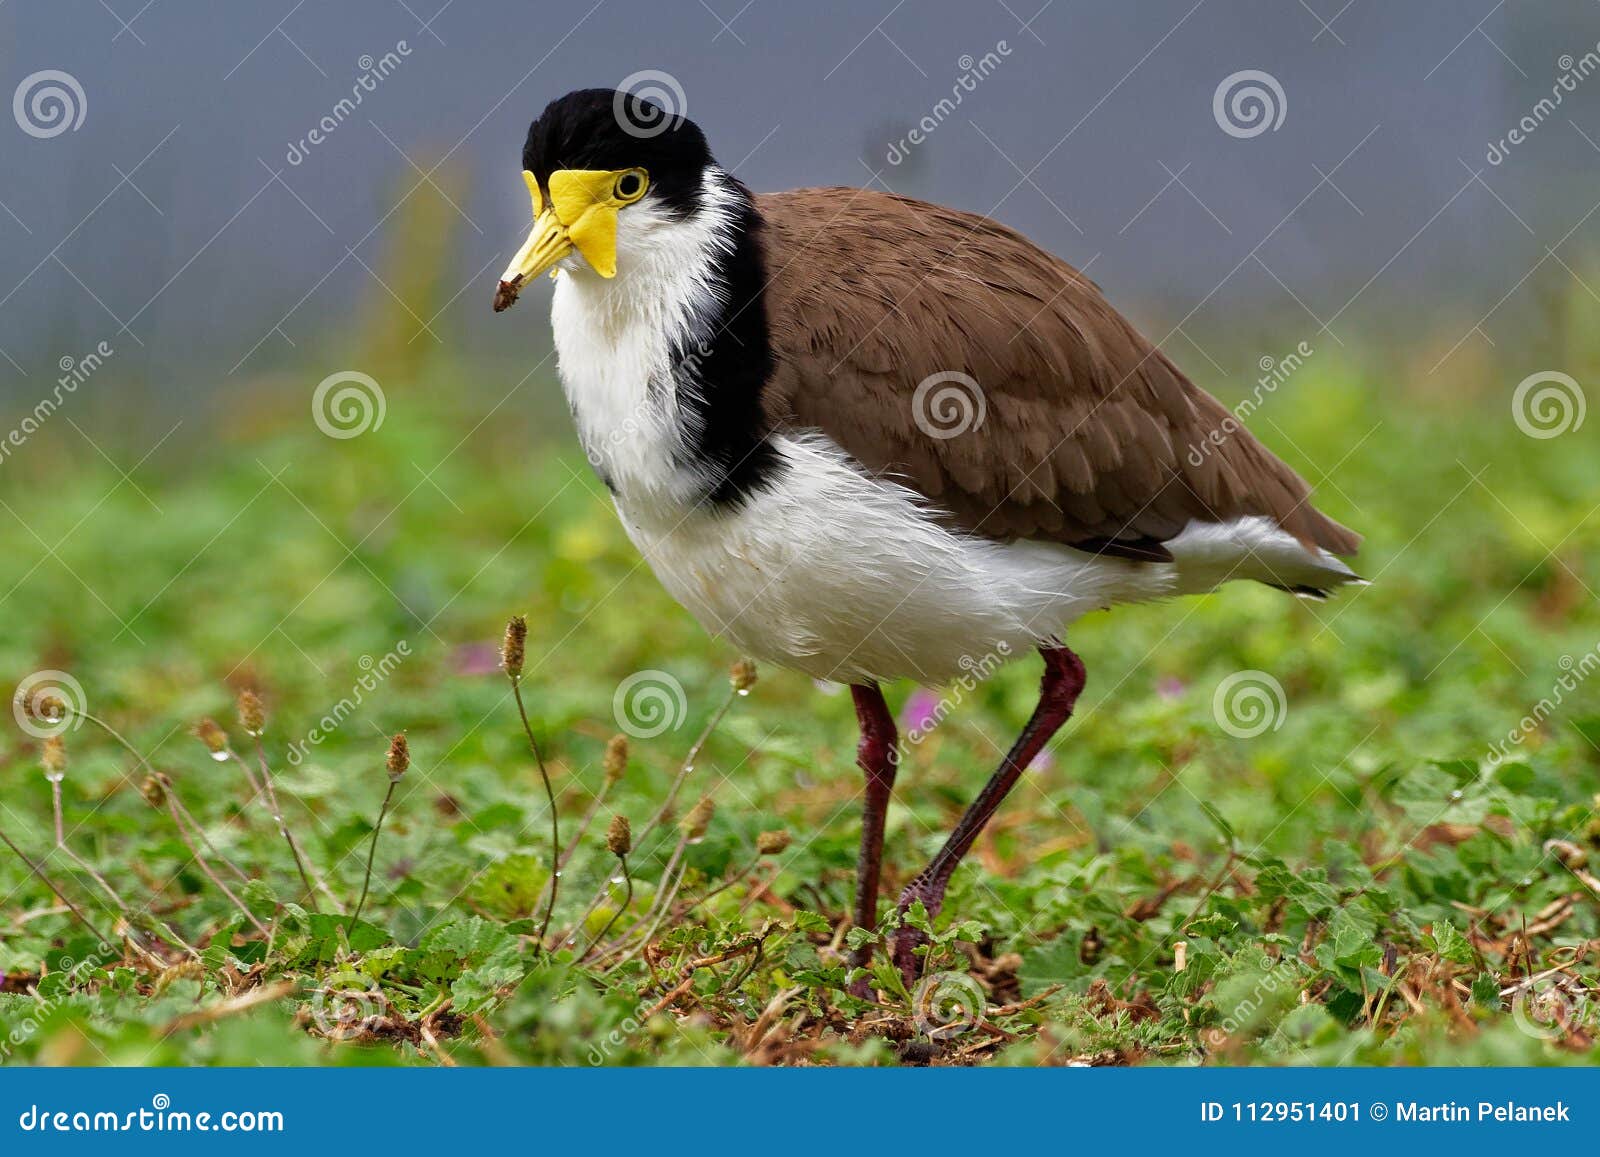 vanellus miles - masked lapwing, wader from australia